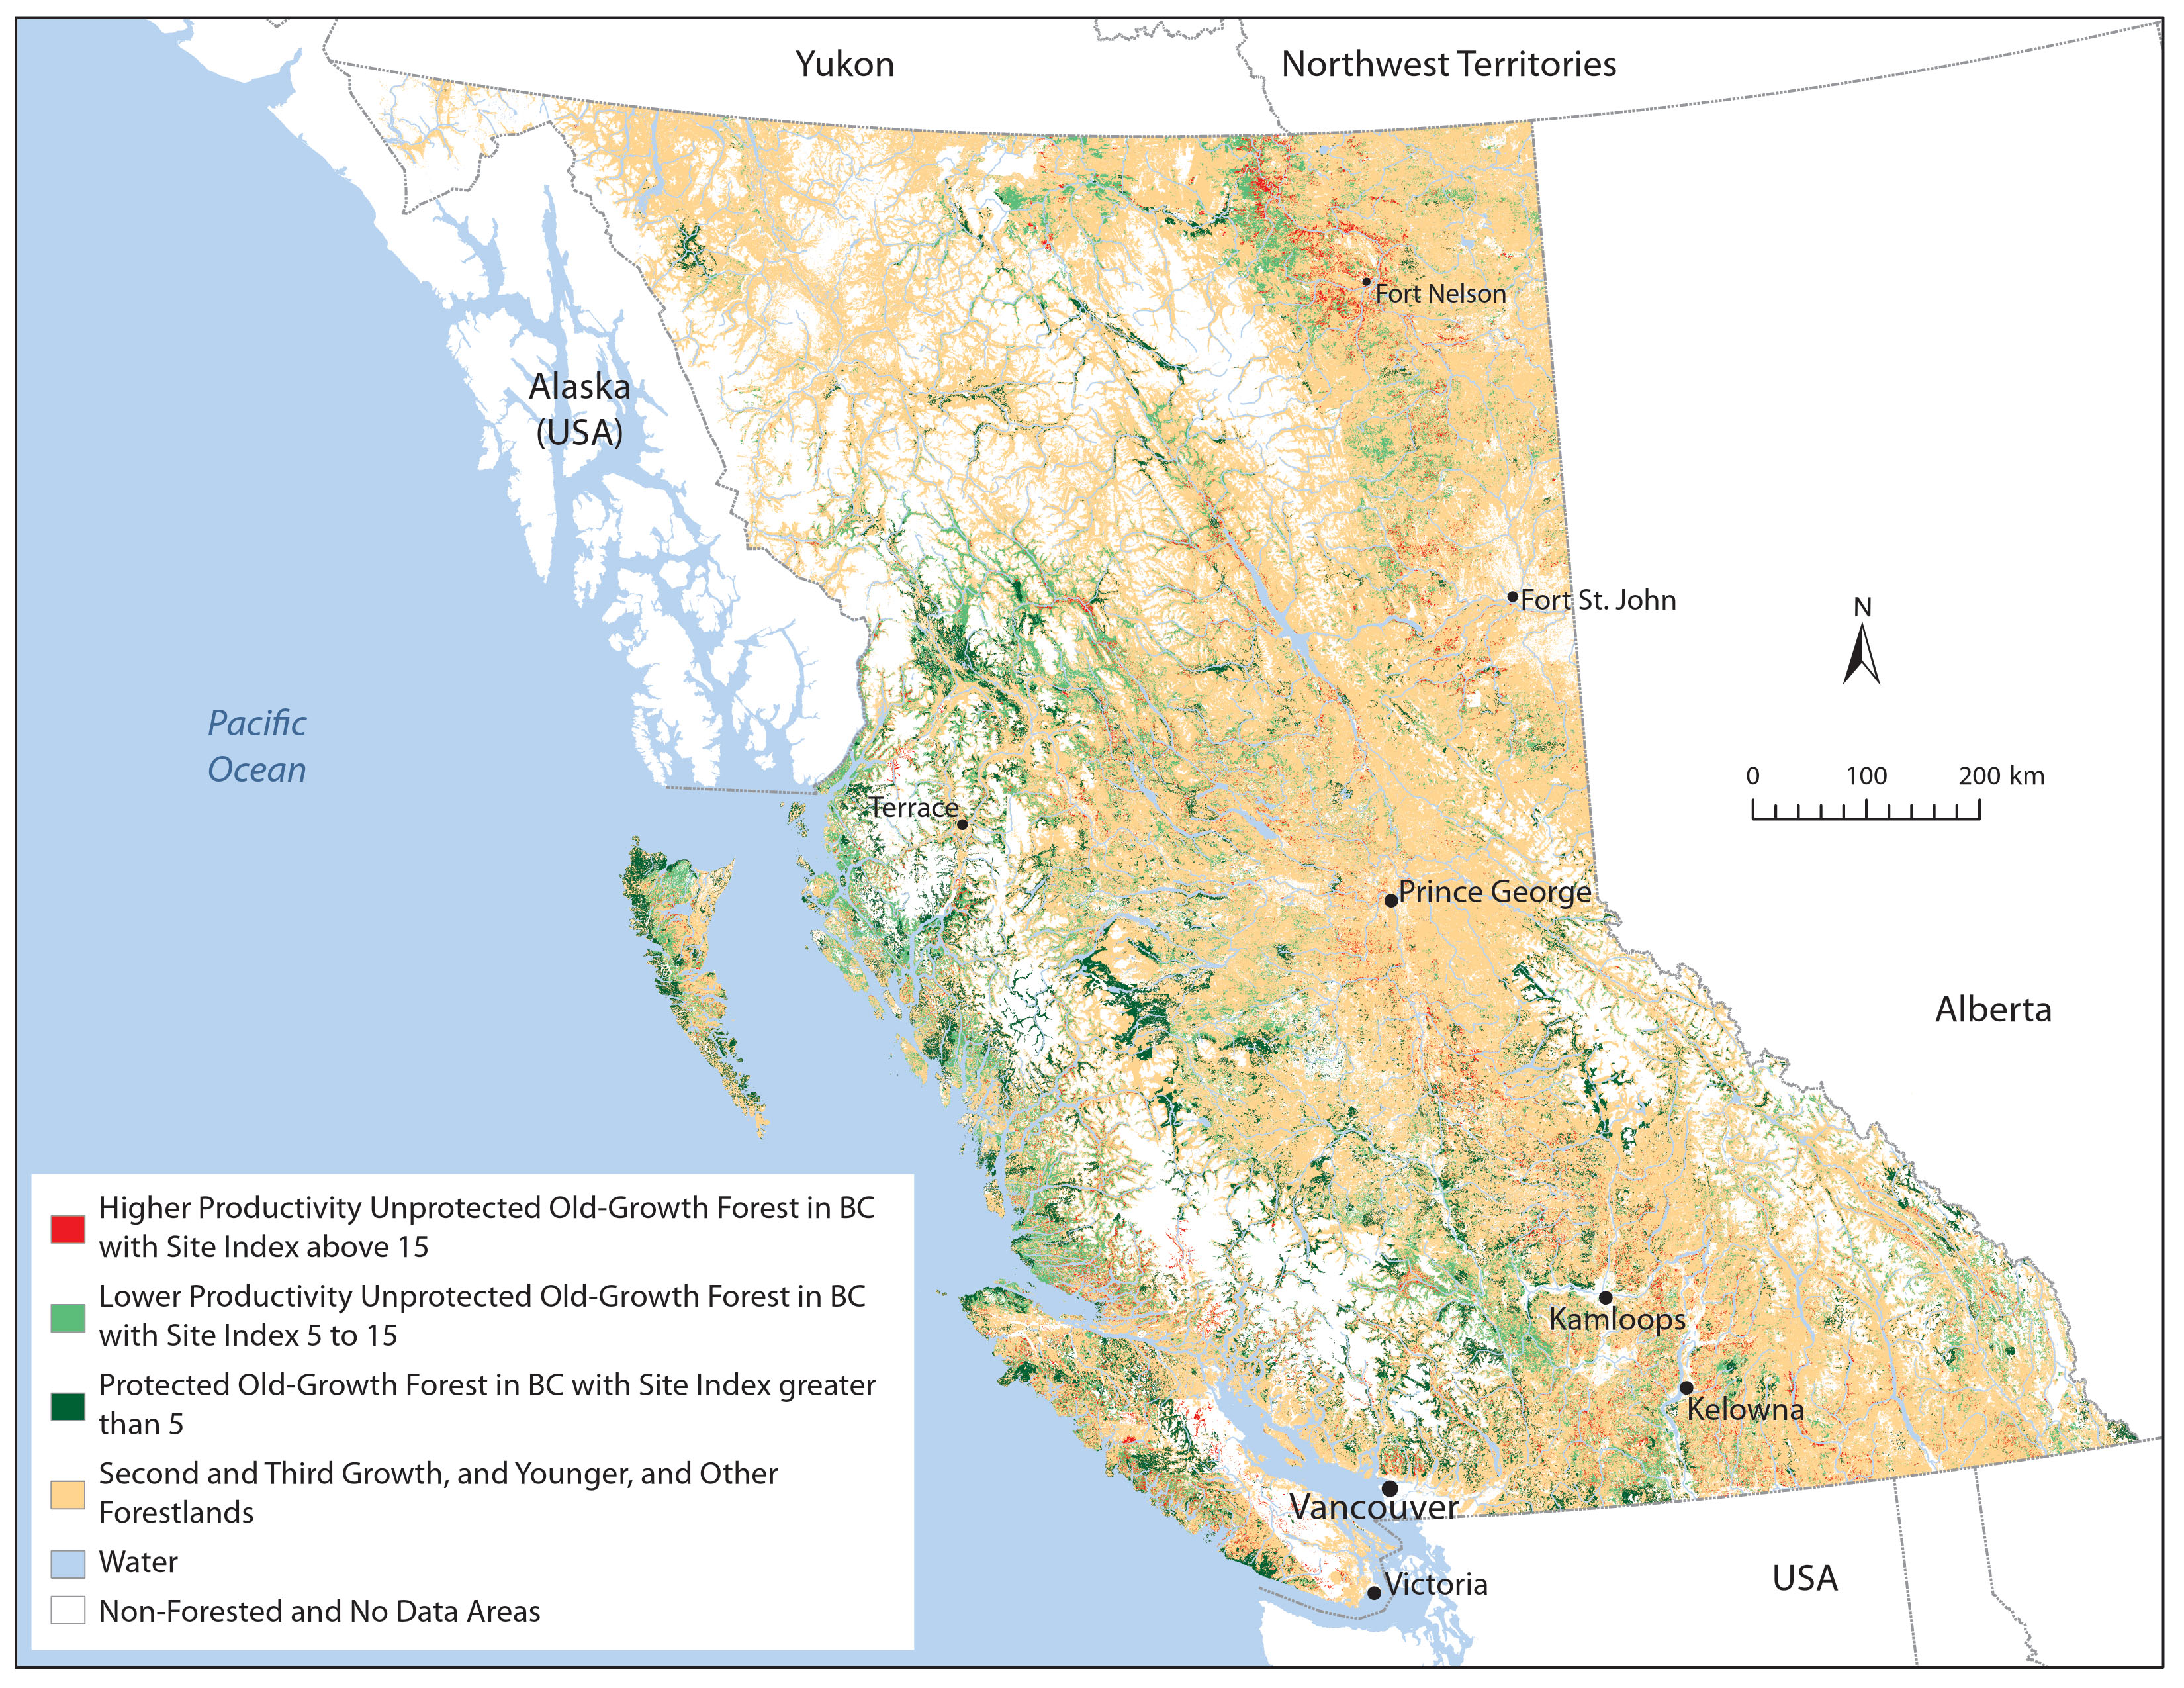 Remaining Old-Growth Forests in BC